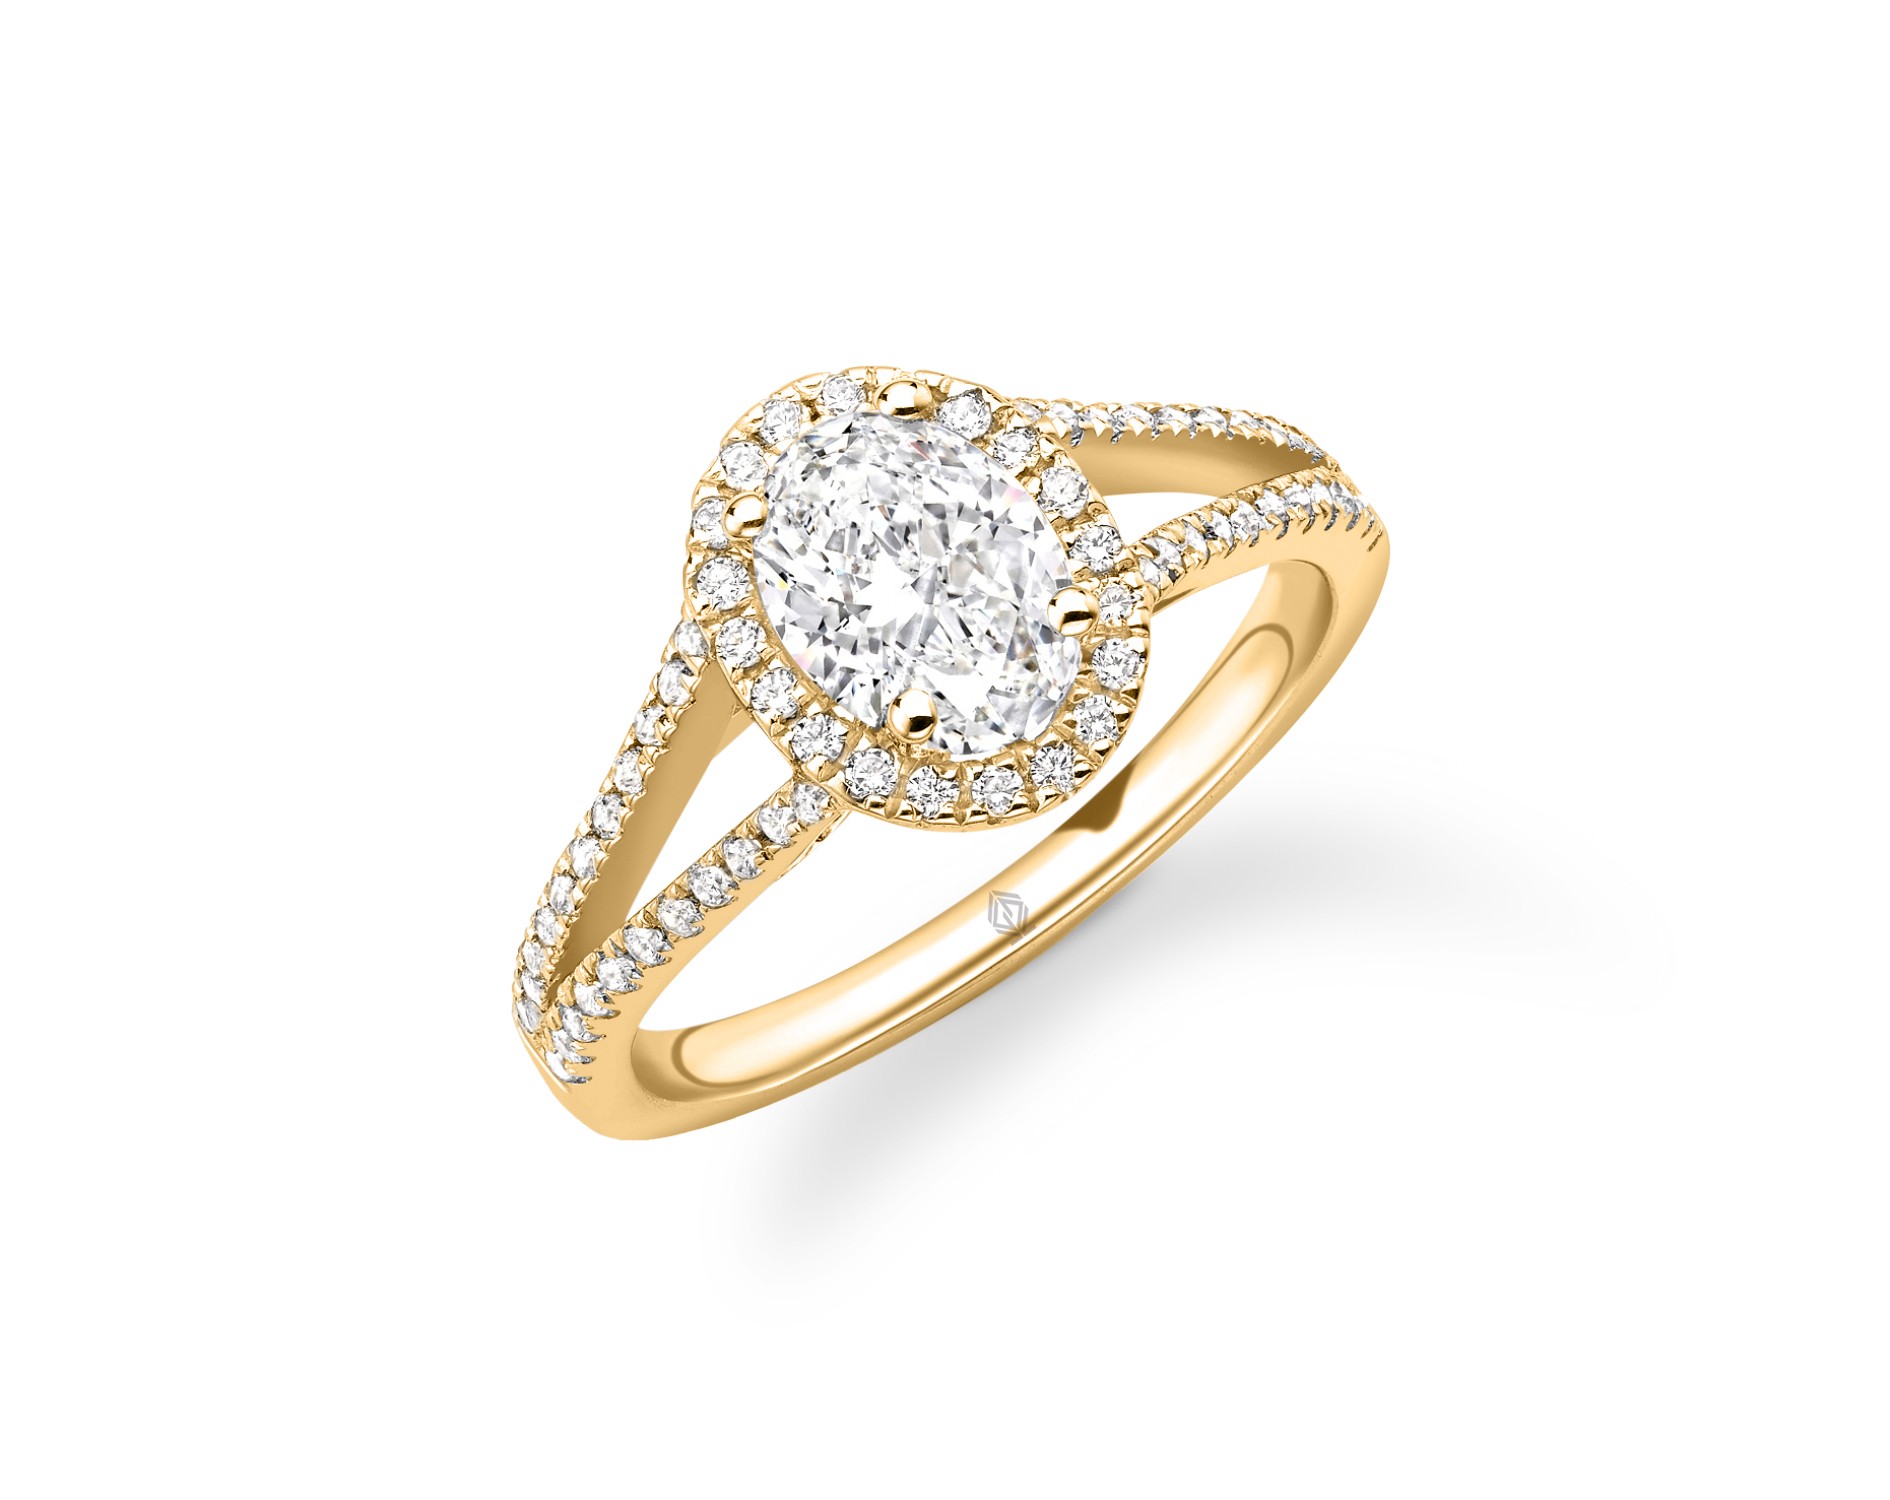 18K YELLOW GOLD OVAL CUT HALO DIAMOND ENGAGEMENT RING WITH SPLIT SHANK IN PAVE SET